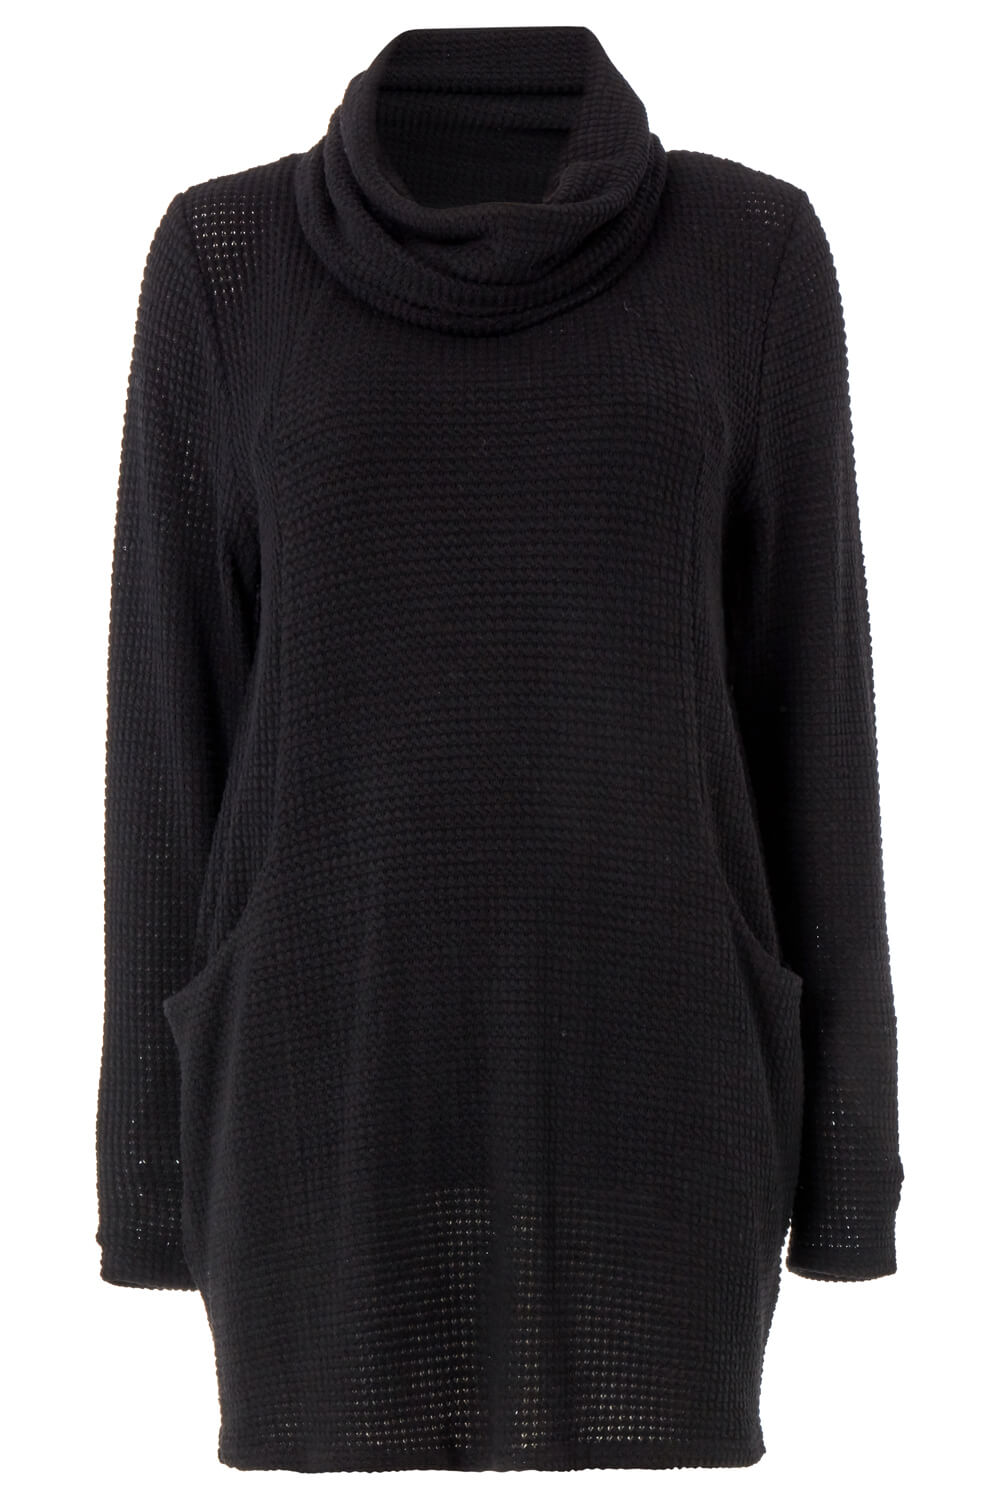 Black Textured Longline Top with Snood, Image 6 of 6